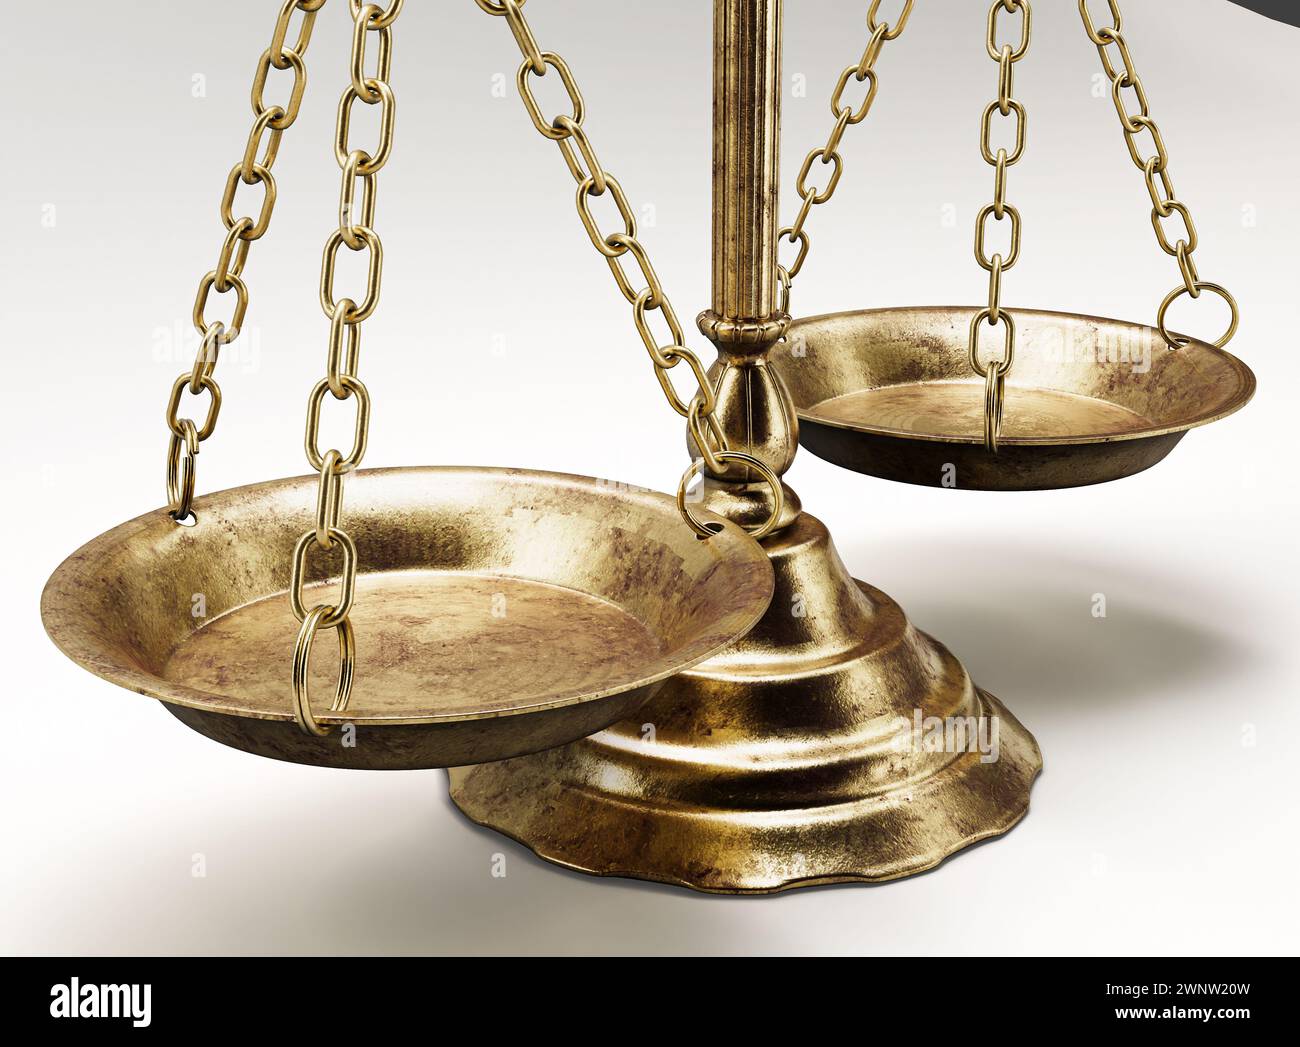 Ornate brass justice scales on a light isolated background - 3D render Stock Photo